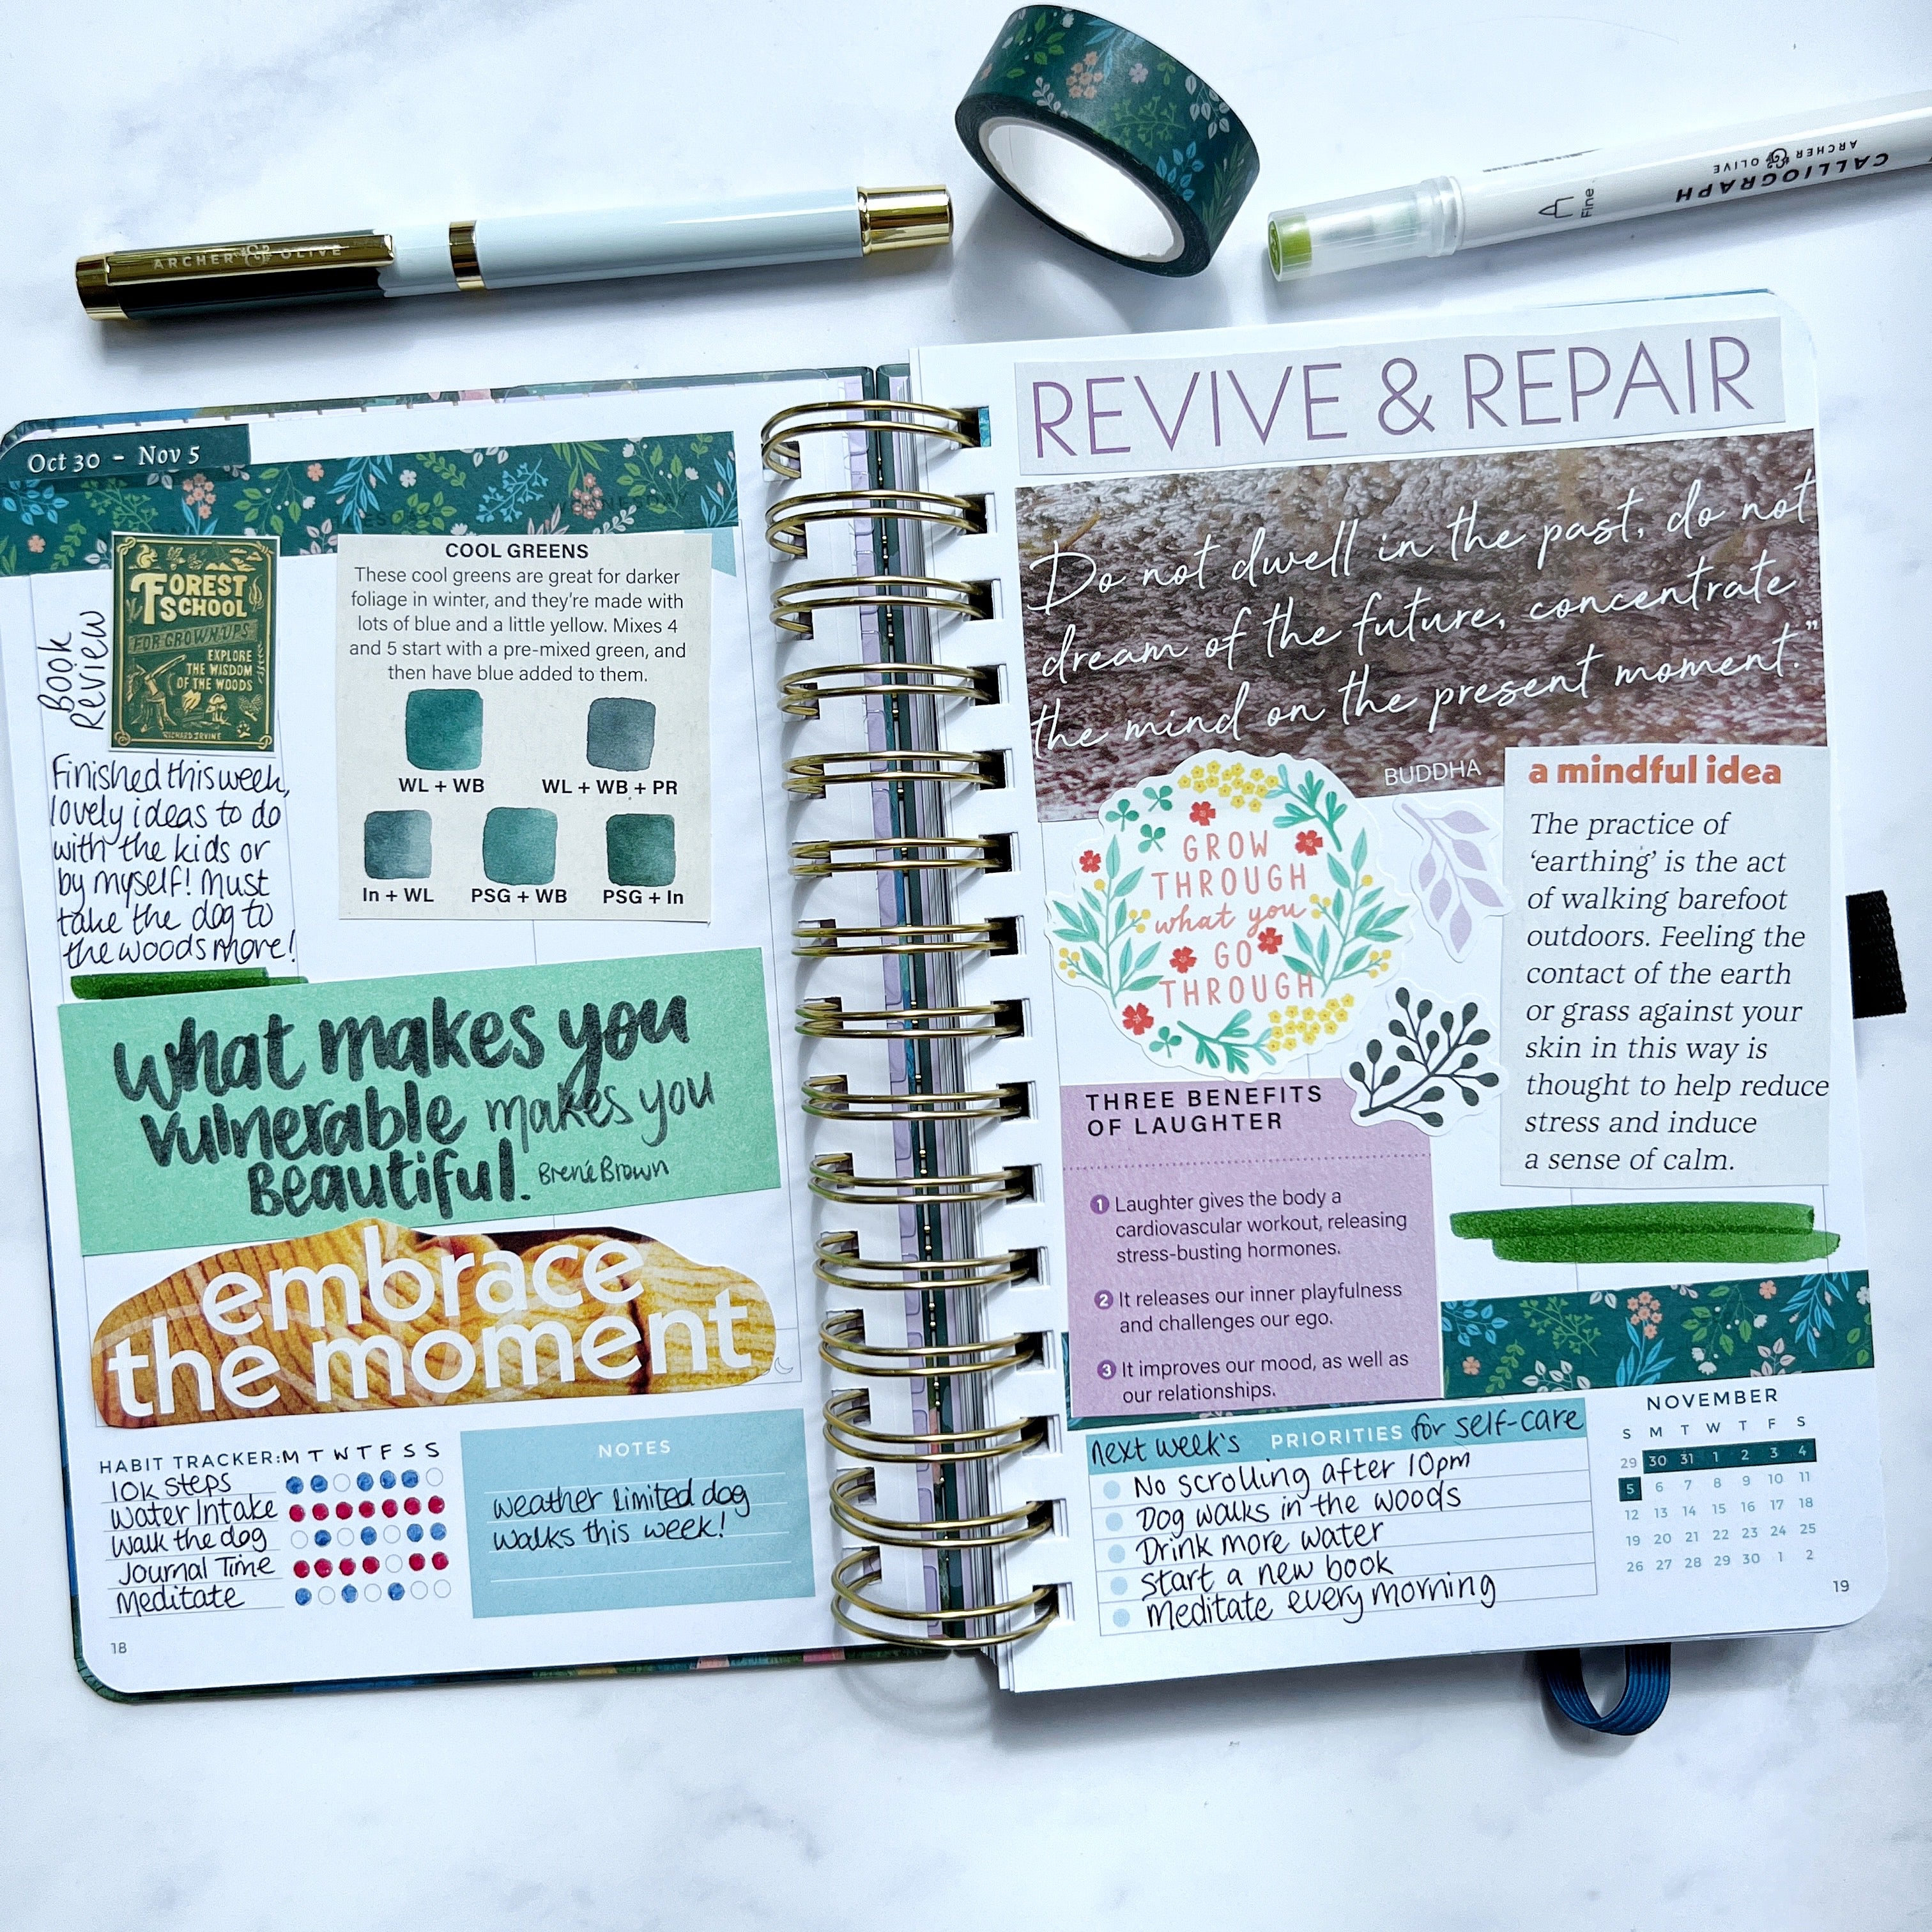 Open planner filled with quotes, magazine cuttings and stickers